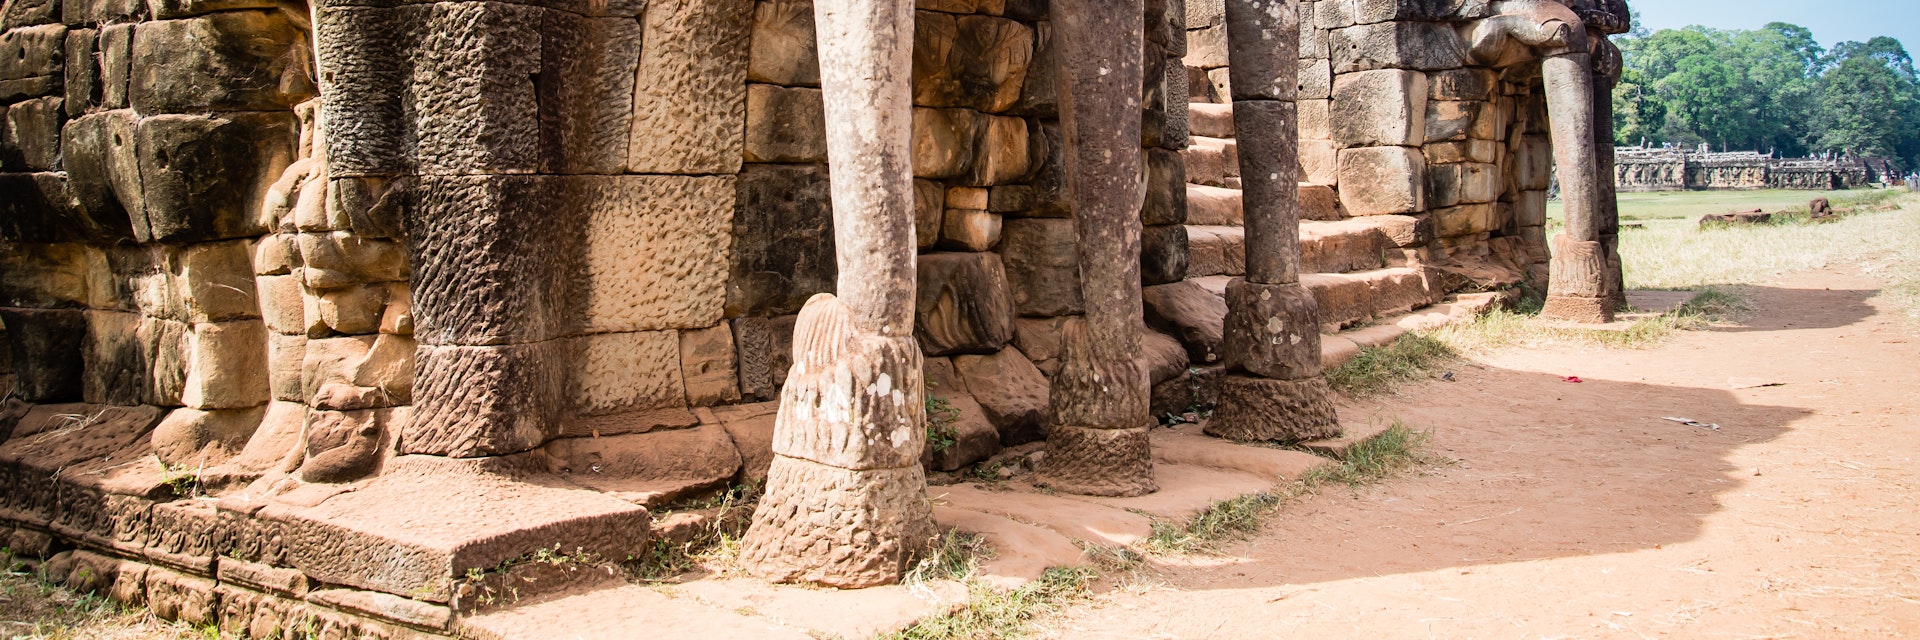 Terrace of the Elephants in Angkor Thom.